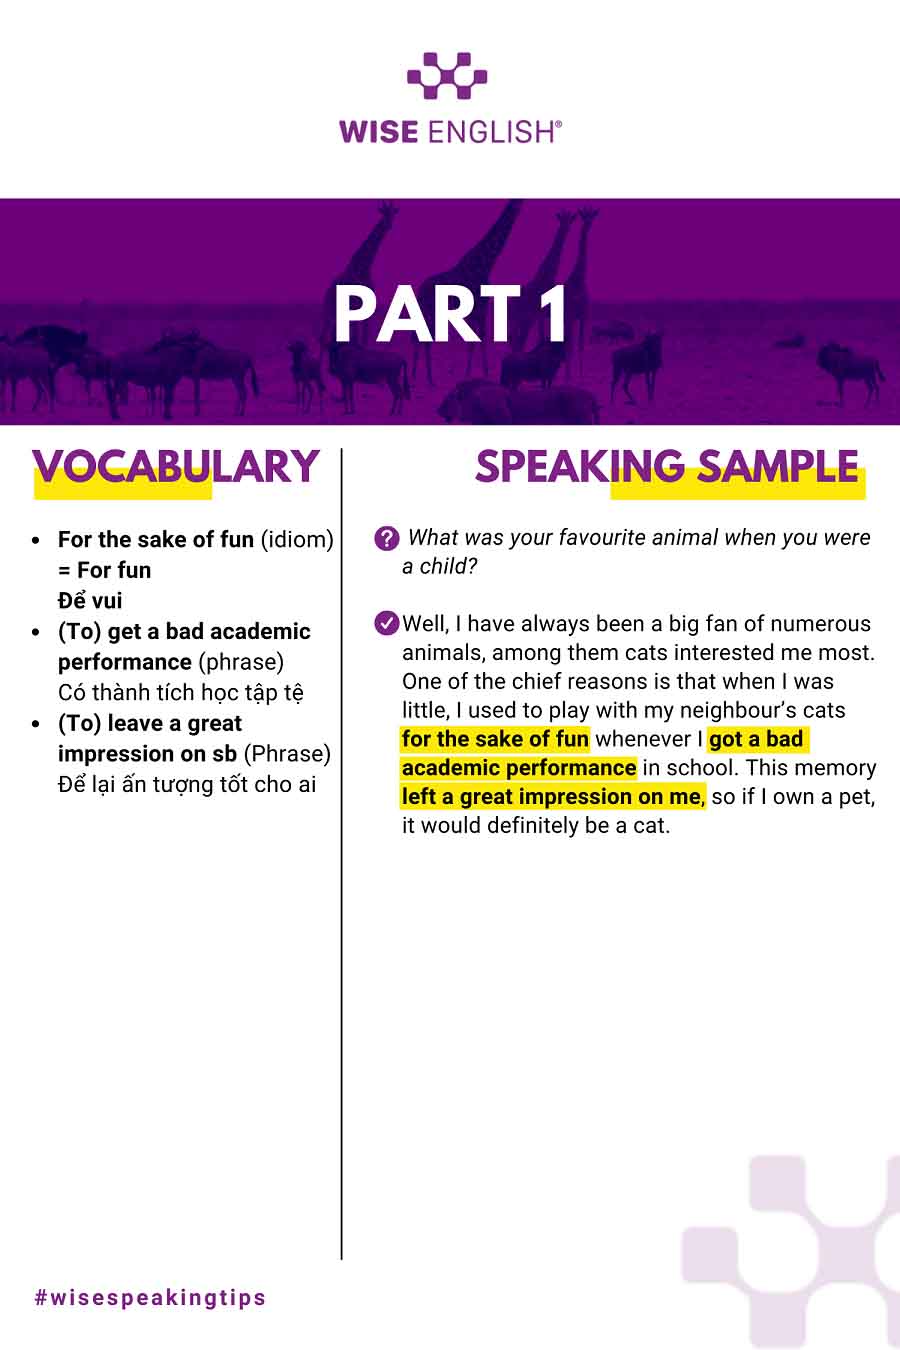 IELTS SPEAKING SAMPLE - CHỦ ĐỀ ANIMALS 3 PARTS | WISE ENGLISH